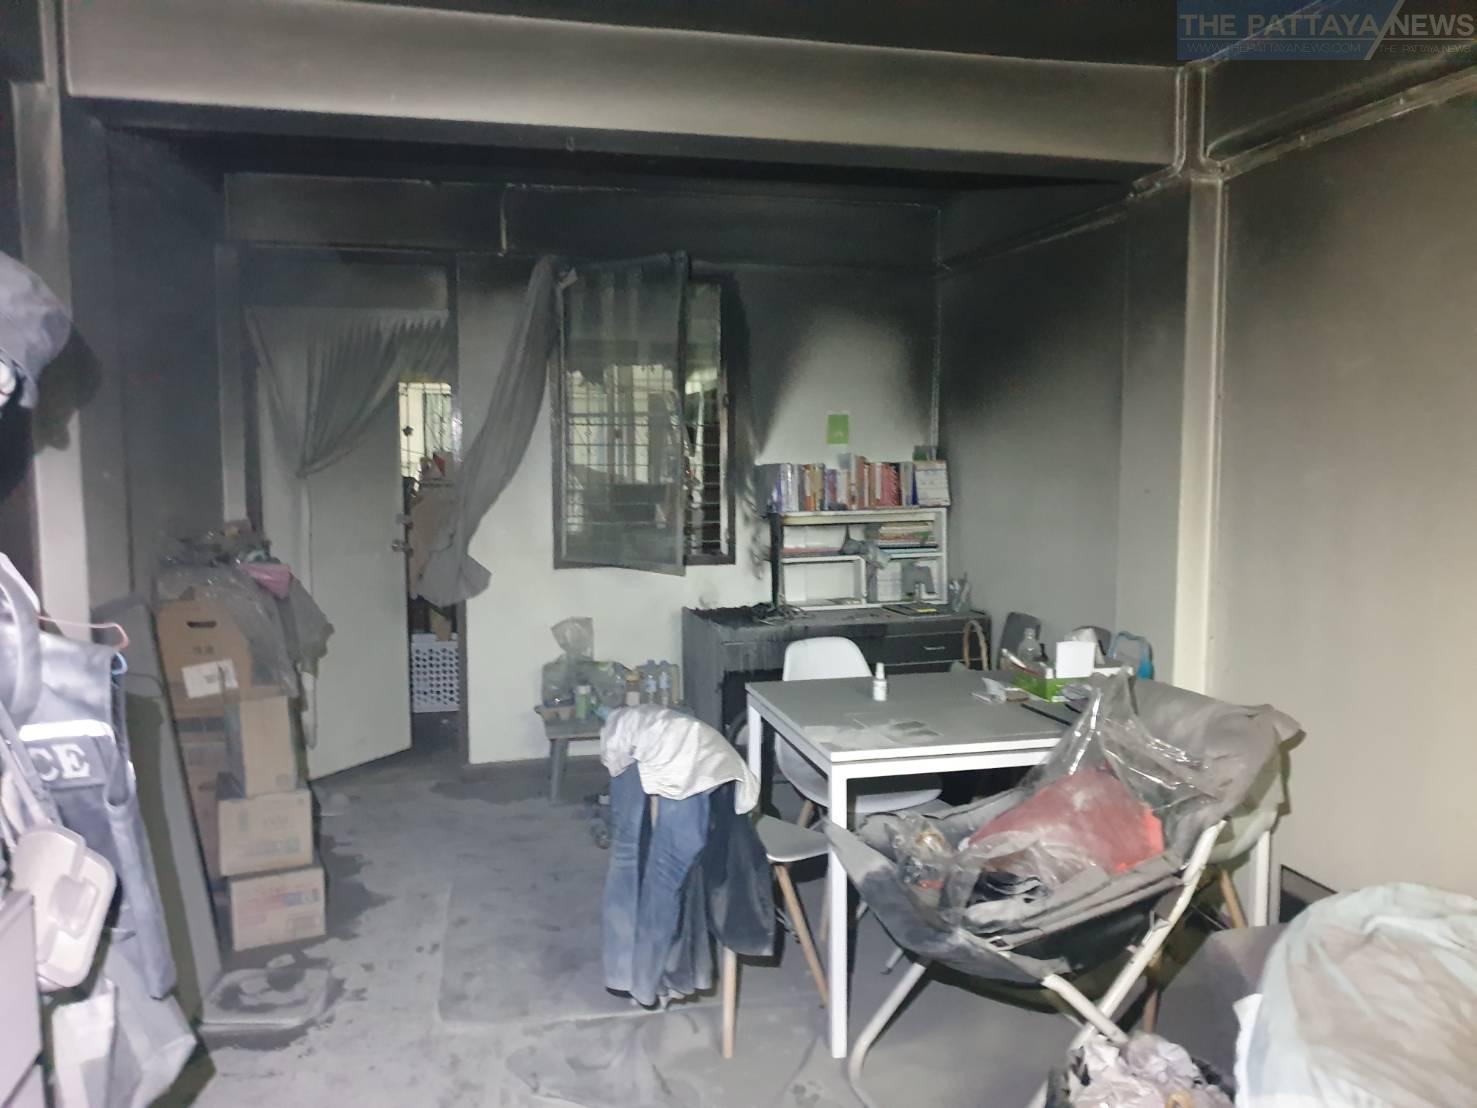 Fire breaks out in Pattaya police dormitory, alarming residents